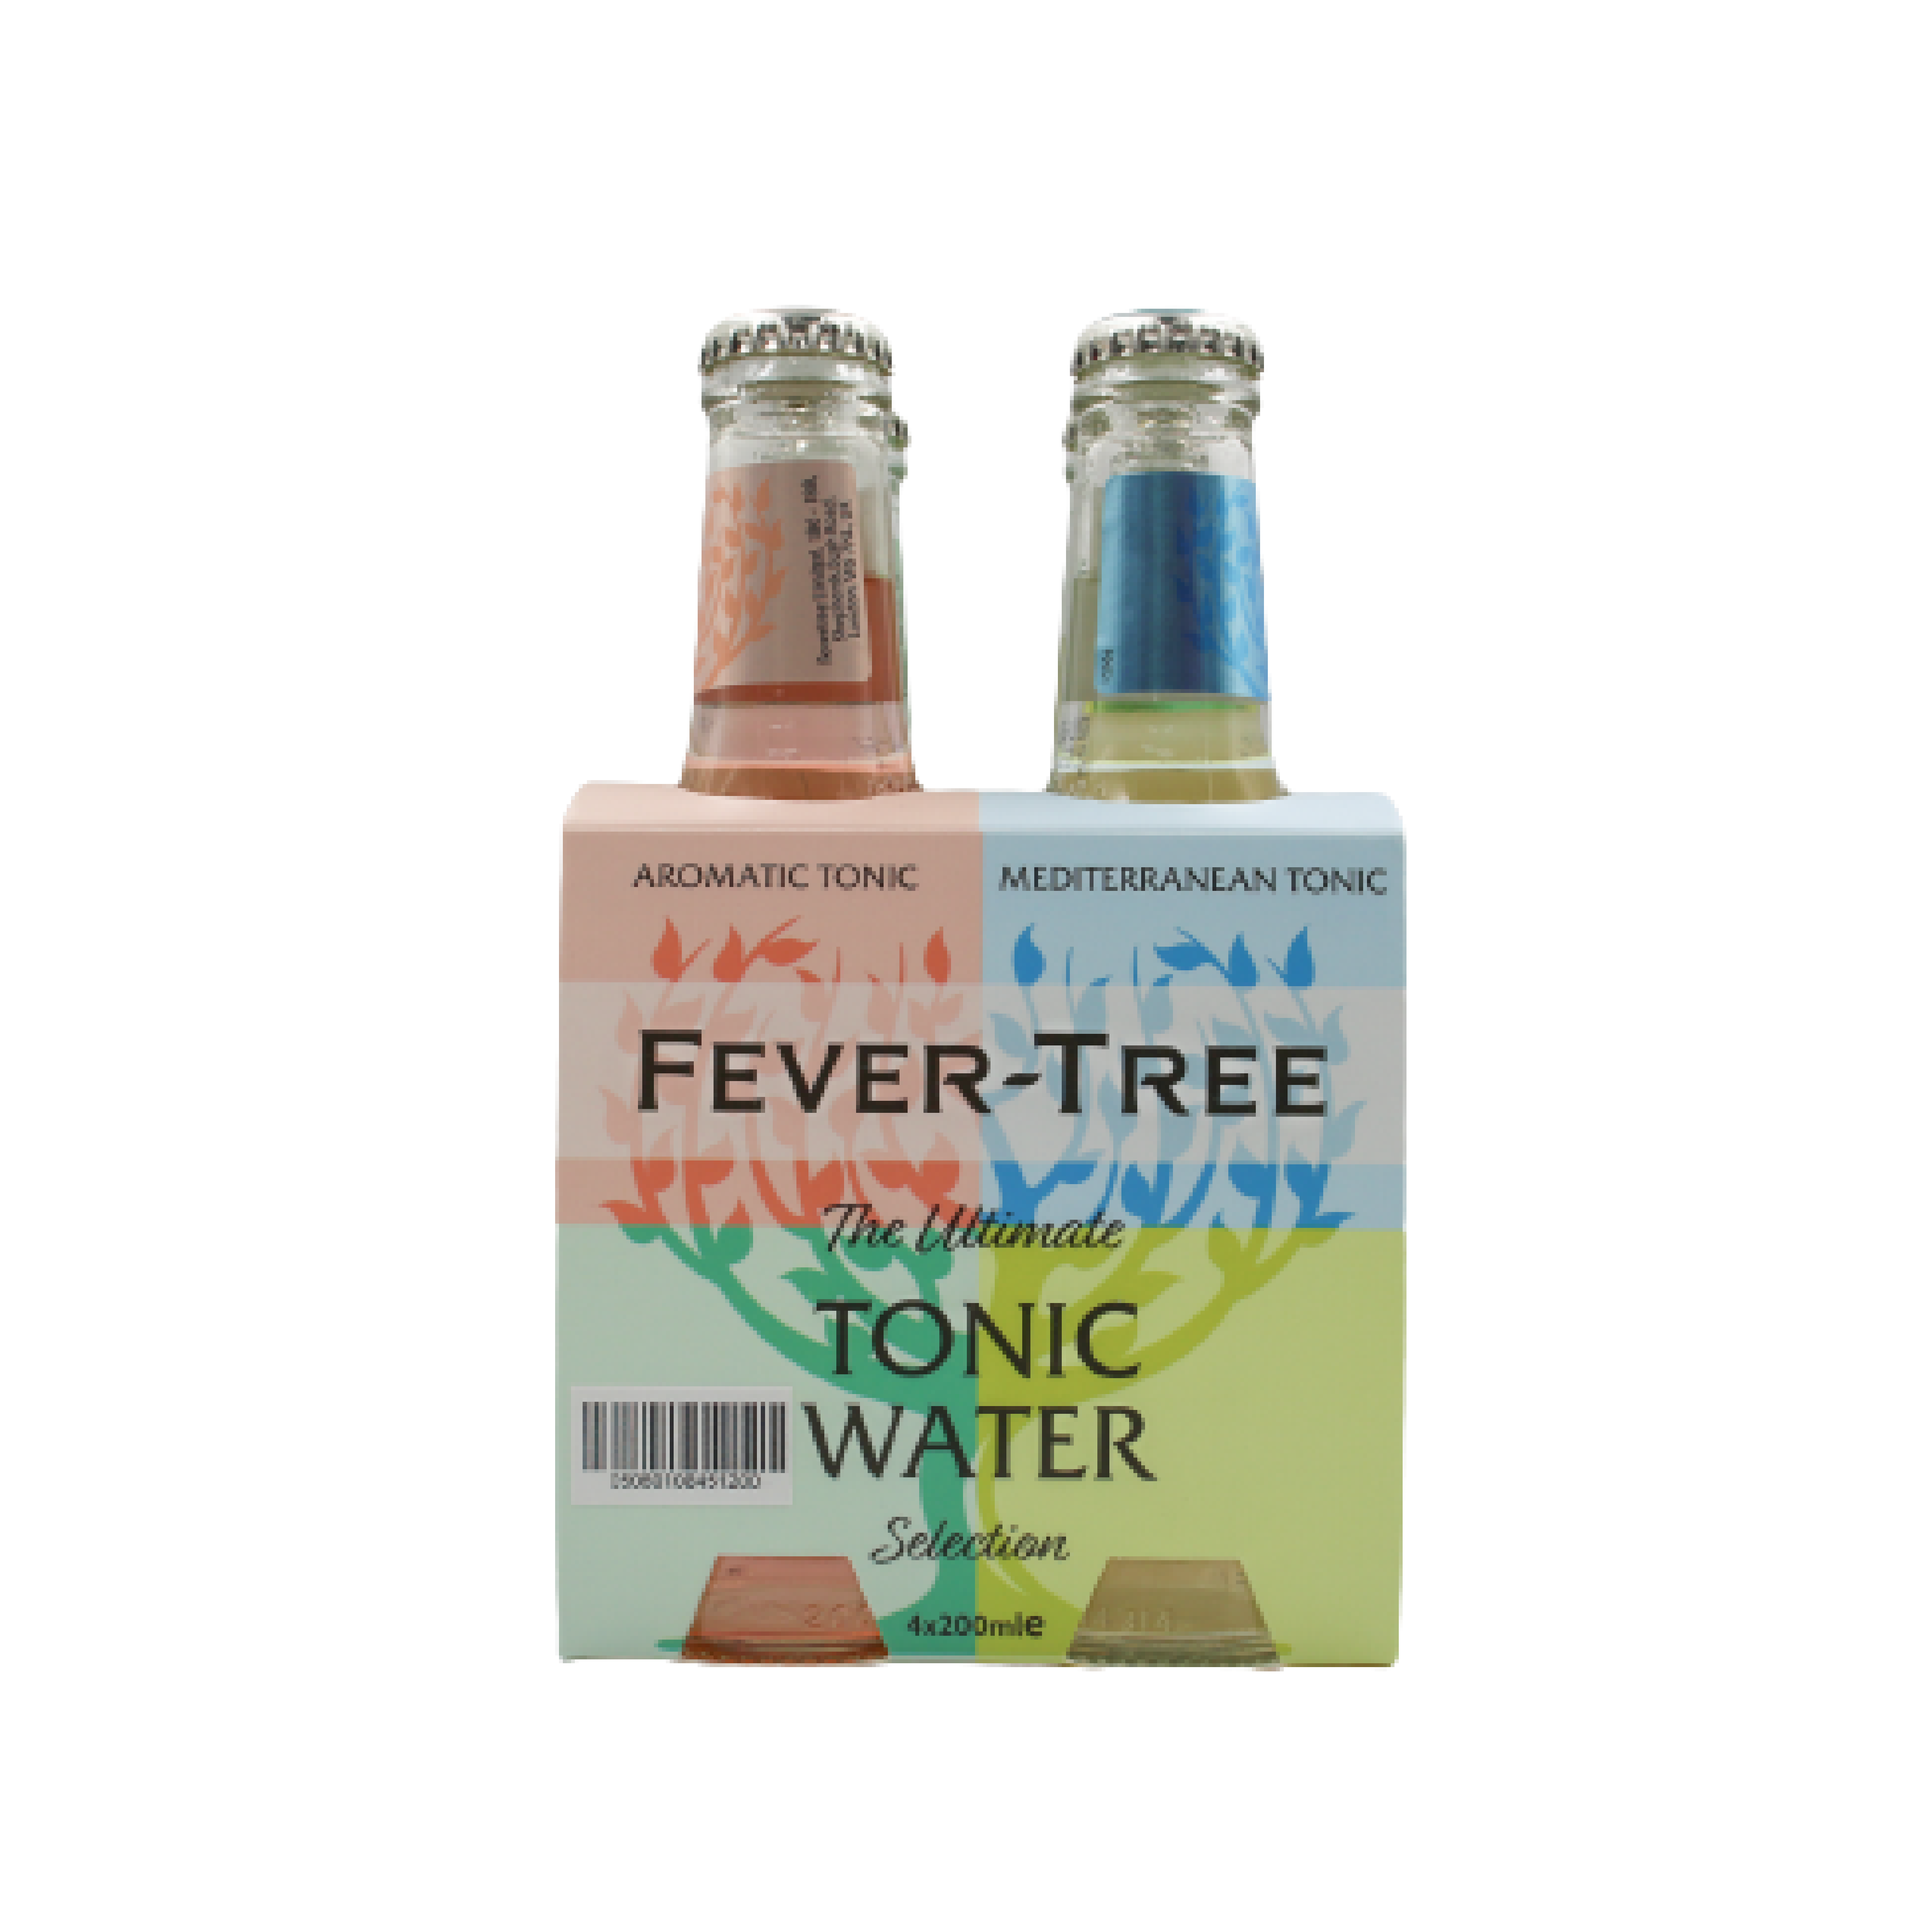 Fever Tree The Ultimate Tonic Selection 200ml Pack x 4BTL 01